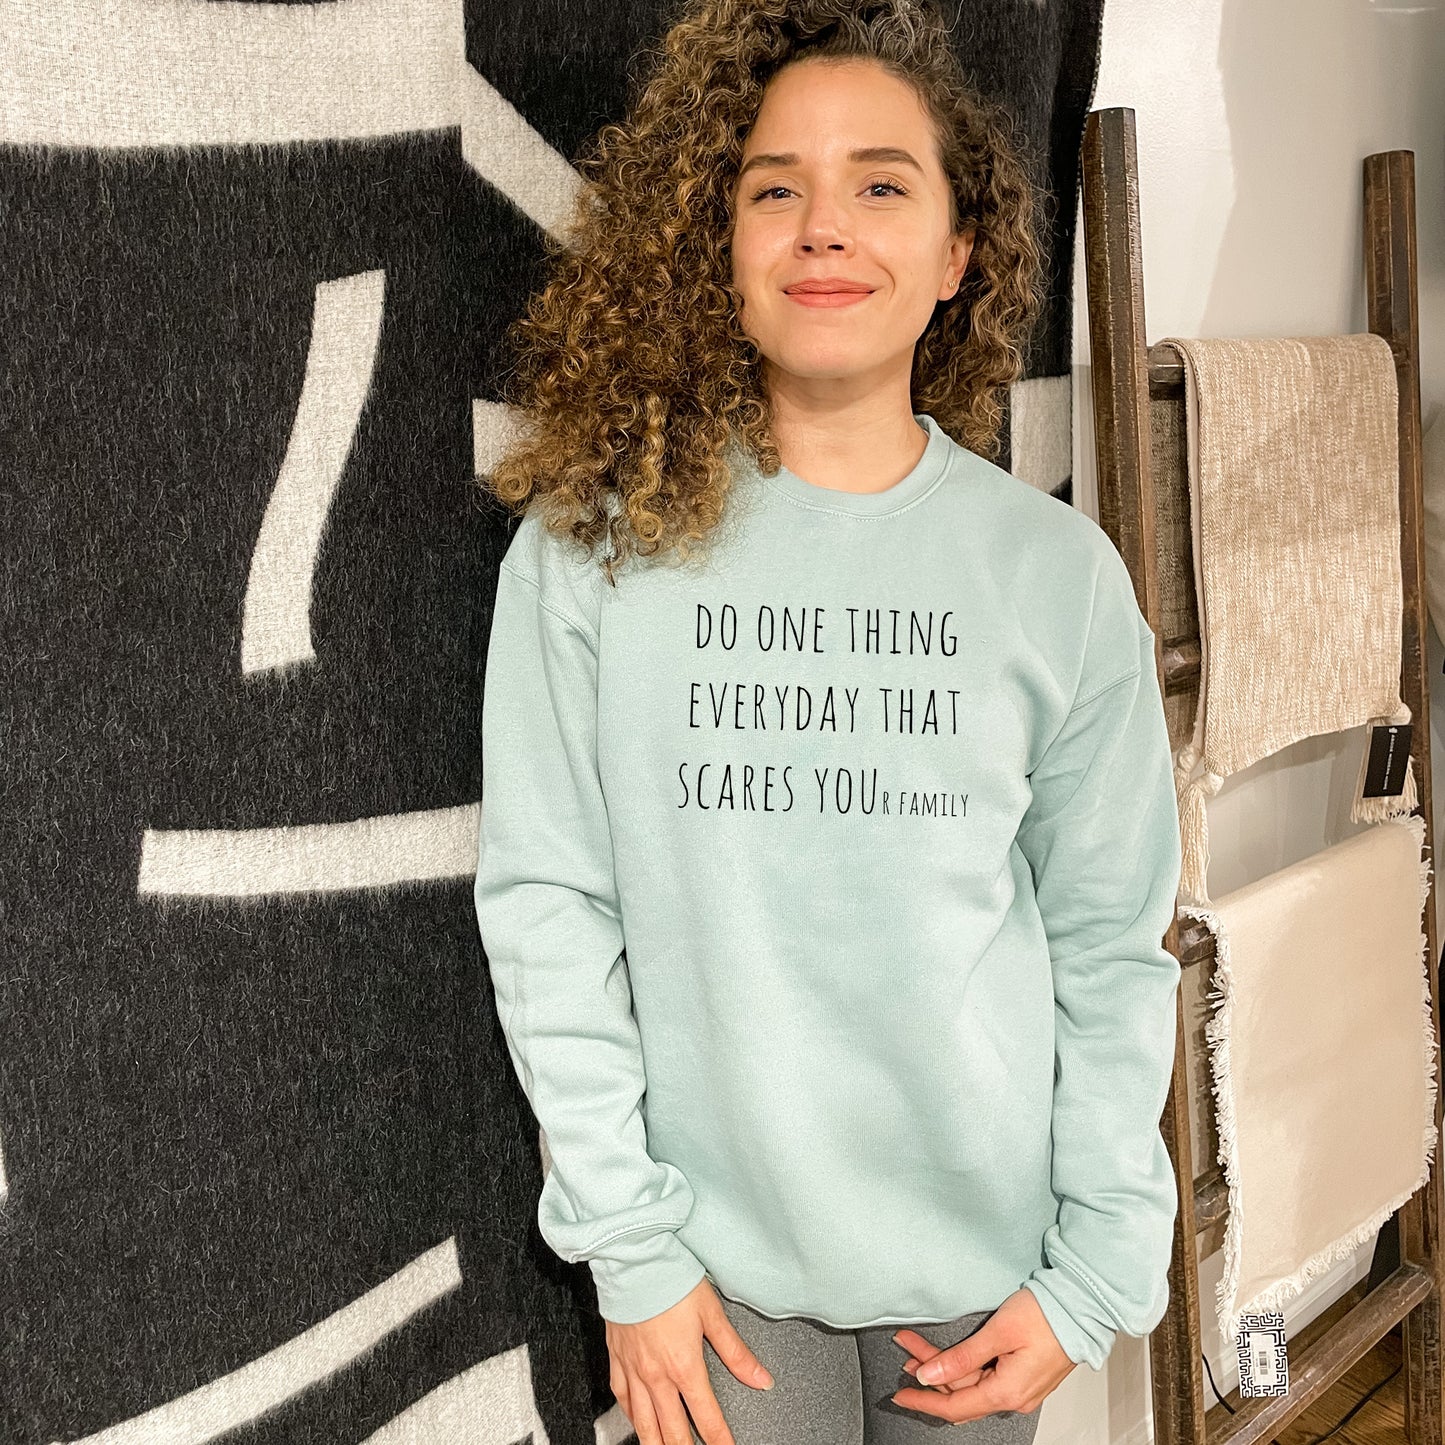 Do One Thing Every Day That Scares Your Family - Unisex Sweatshirt - Heather Gray or Dusty Blue